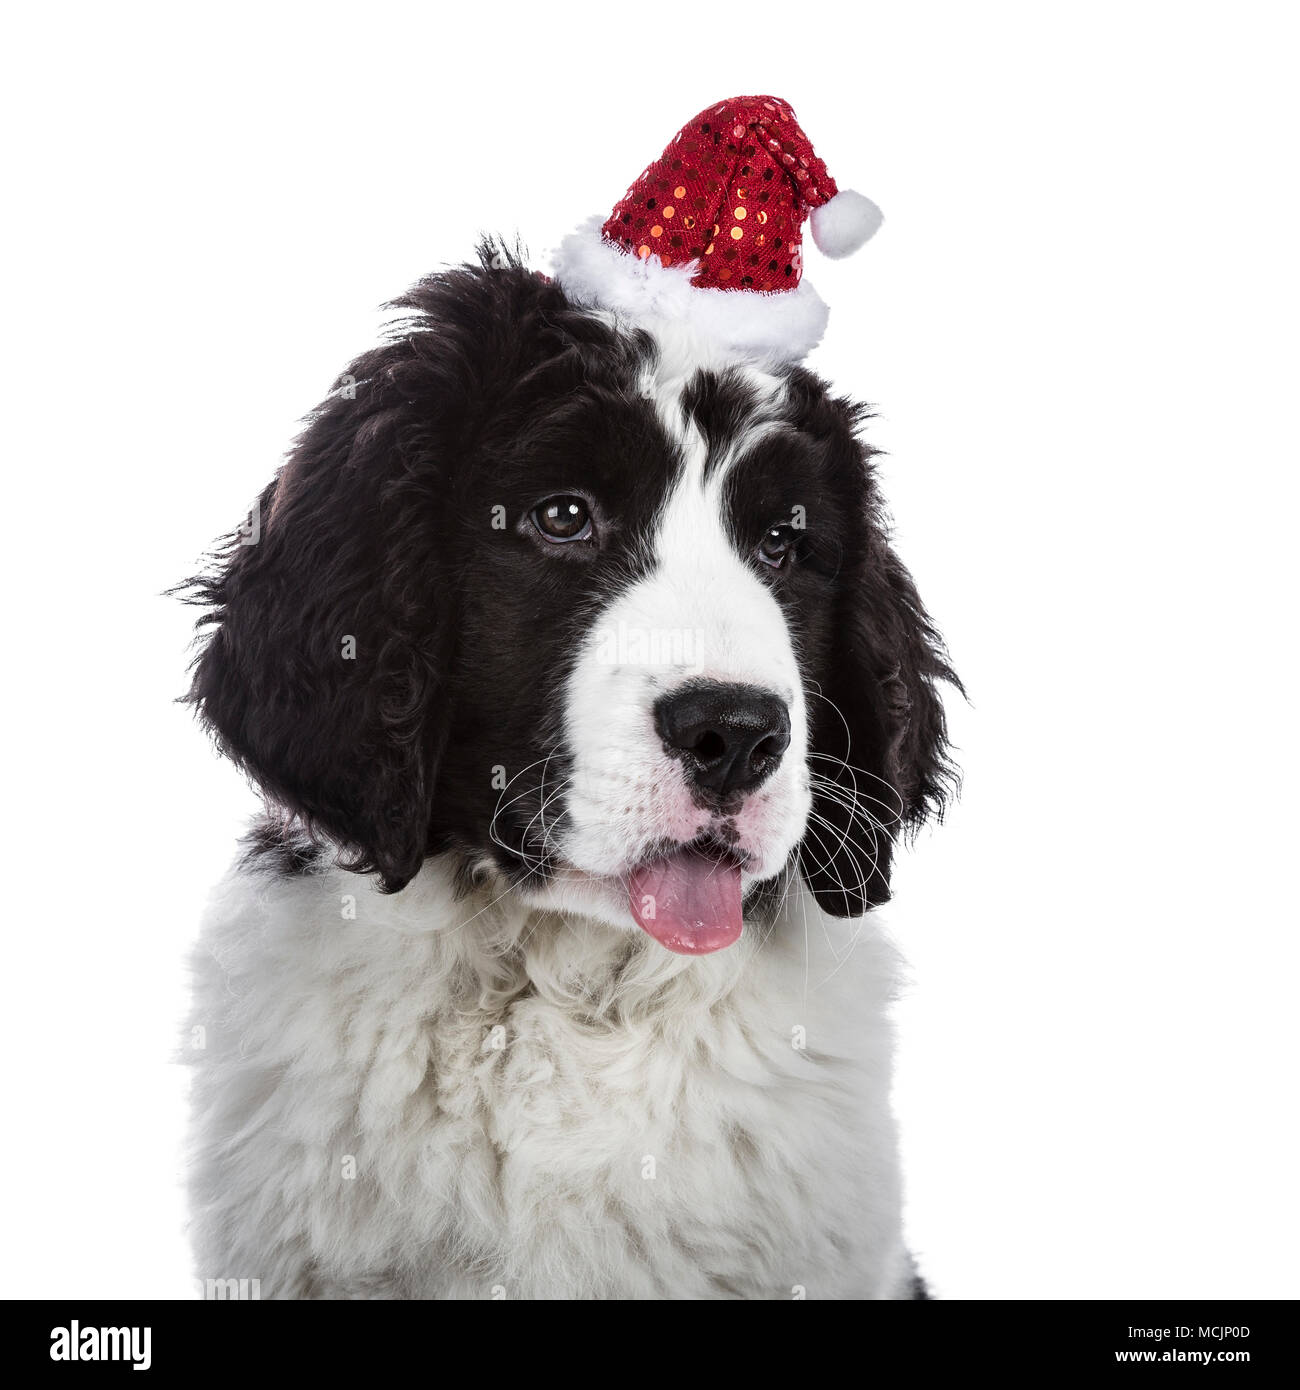 Head shot of black and white Landseer puppy dog wearing cute little Christmas hat while looking down and sticking tongue out Stock Photo